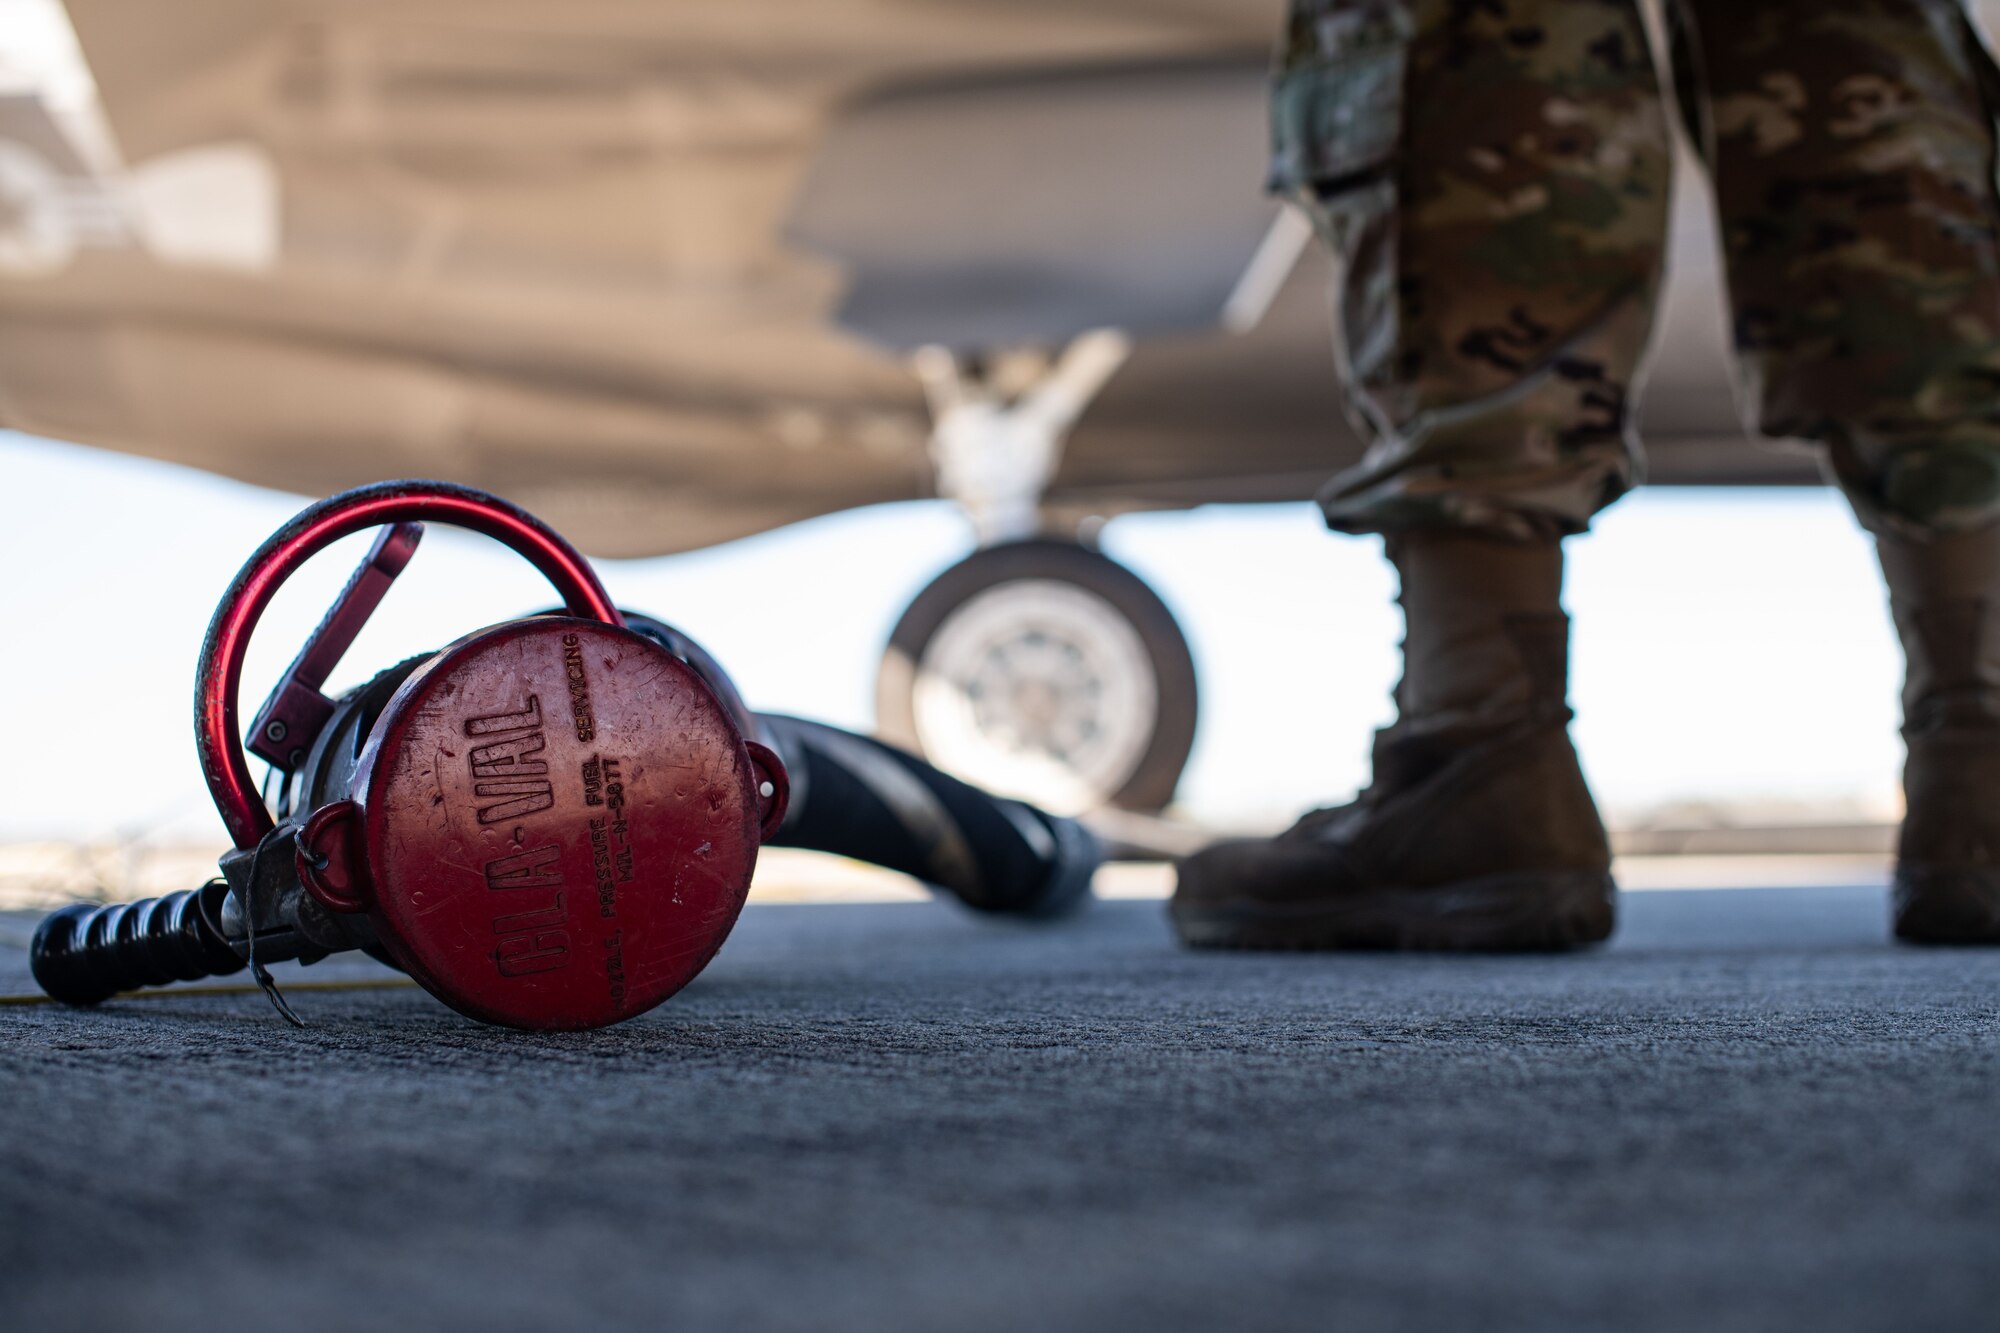 Fuel hose sits on the ground next to an Airman.